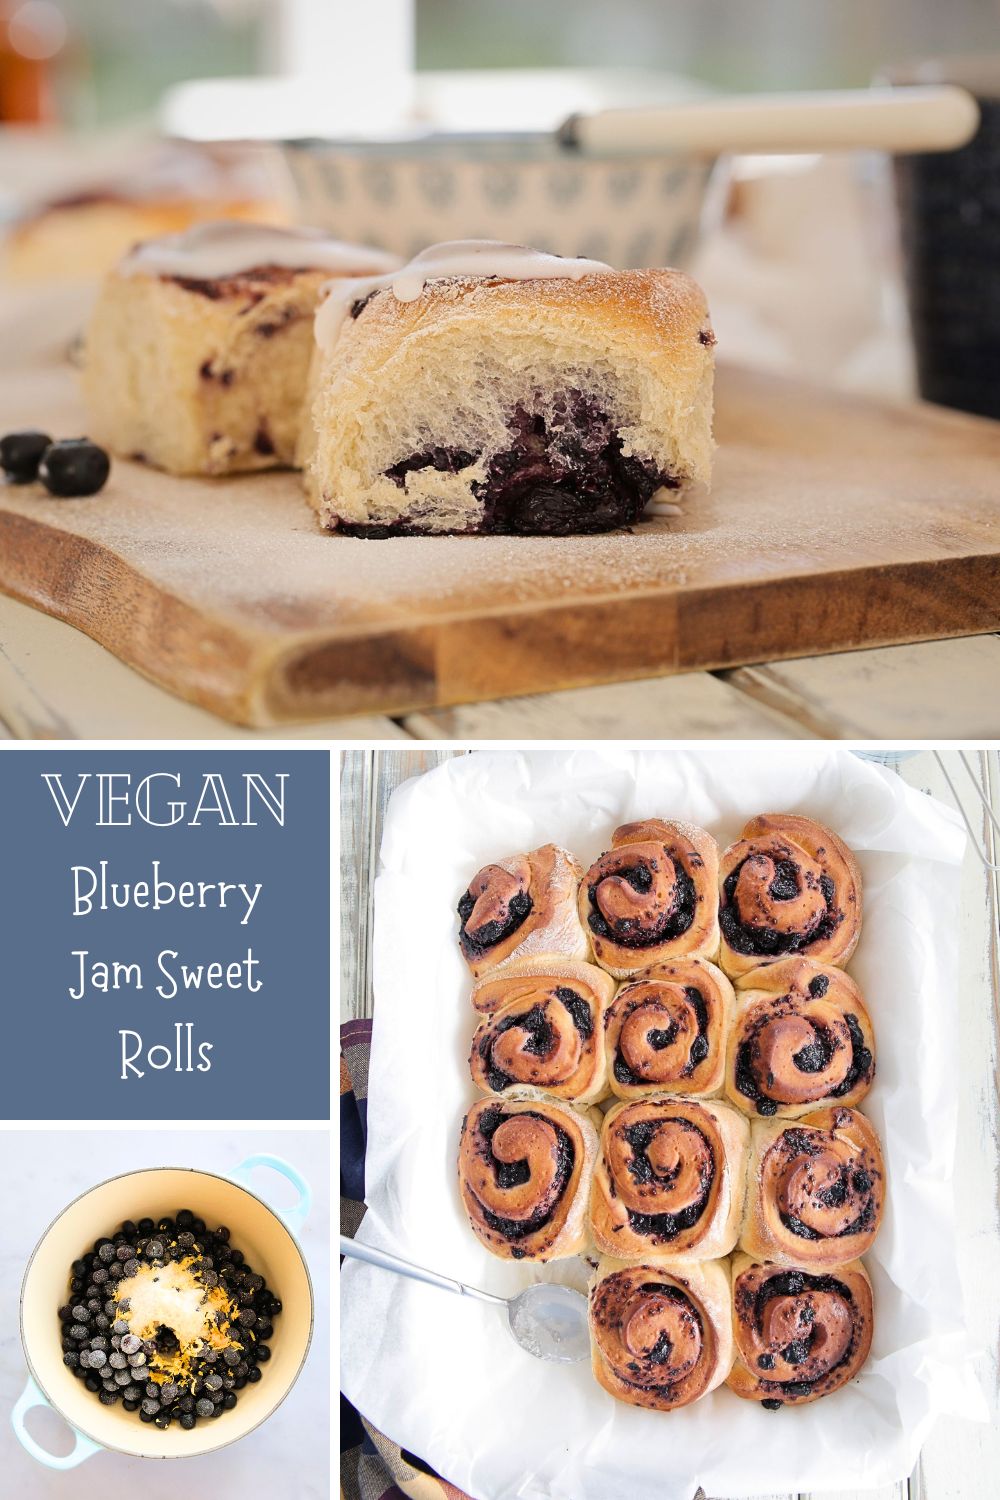 These blueberry jam sweet rolls are absolutely bursting with fruity, sweet, jammy flavour! The soft fluffy dough is swirled with the easiest homemade blueberry jam then baked to golden perfection before being topped with a vegan cream cheese frosting. Utterly delicious! #blueberryrolls #blueberryjam #homemadebread #sweetrolls #blueberrysweetrolls